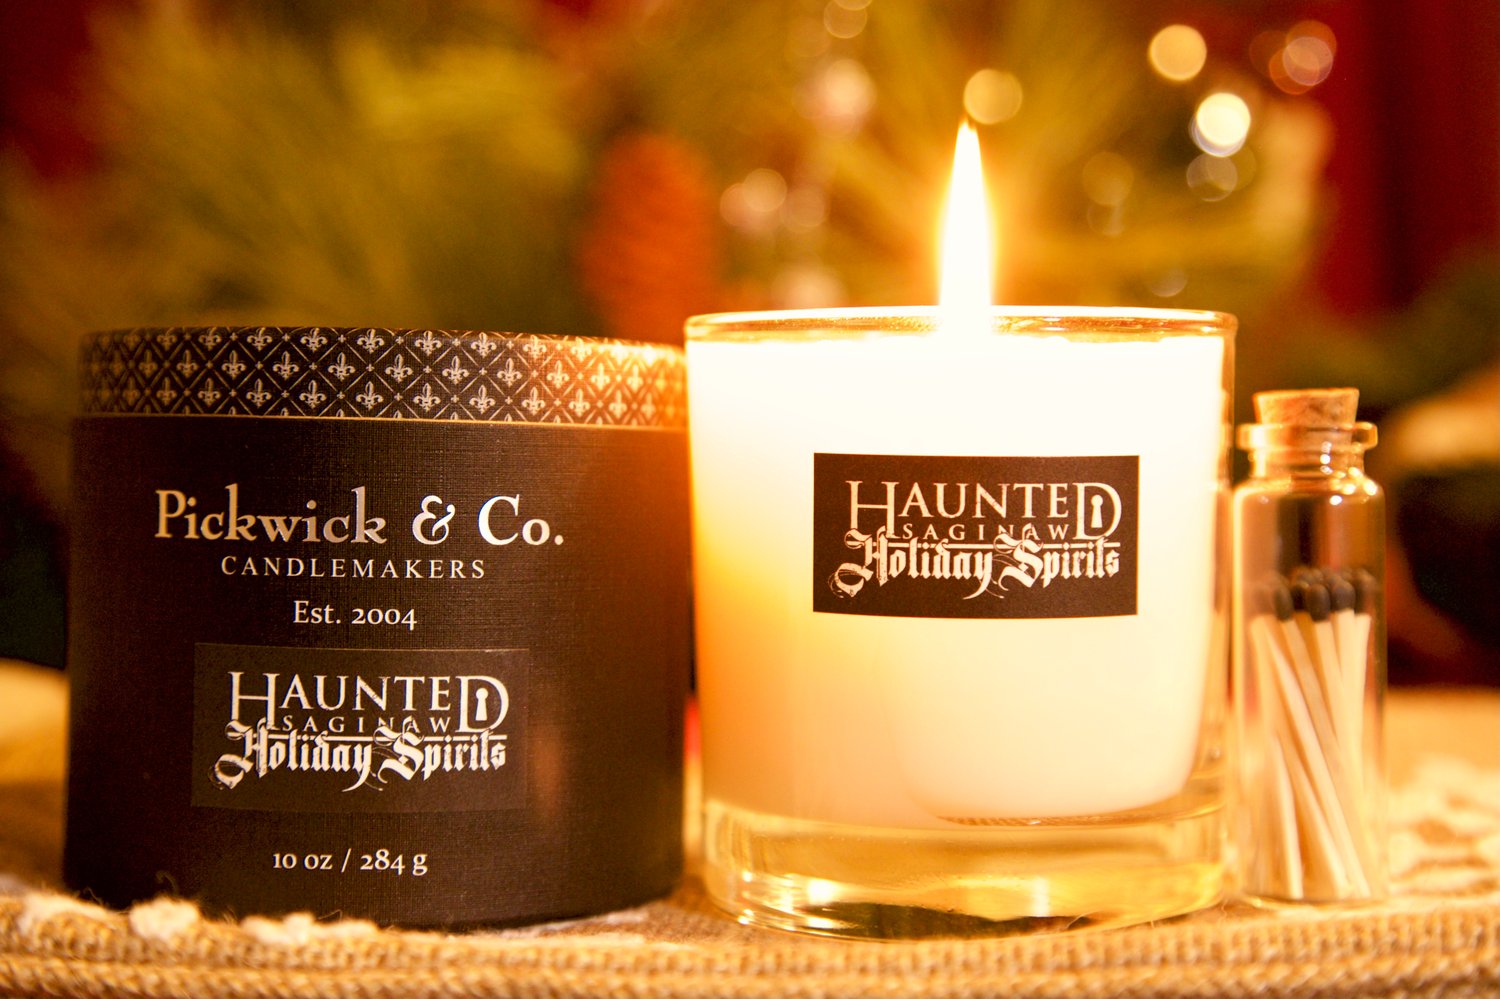 Holiday Spirits Candle: Limited Edition!